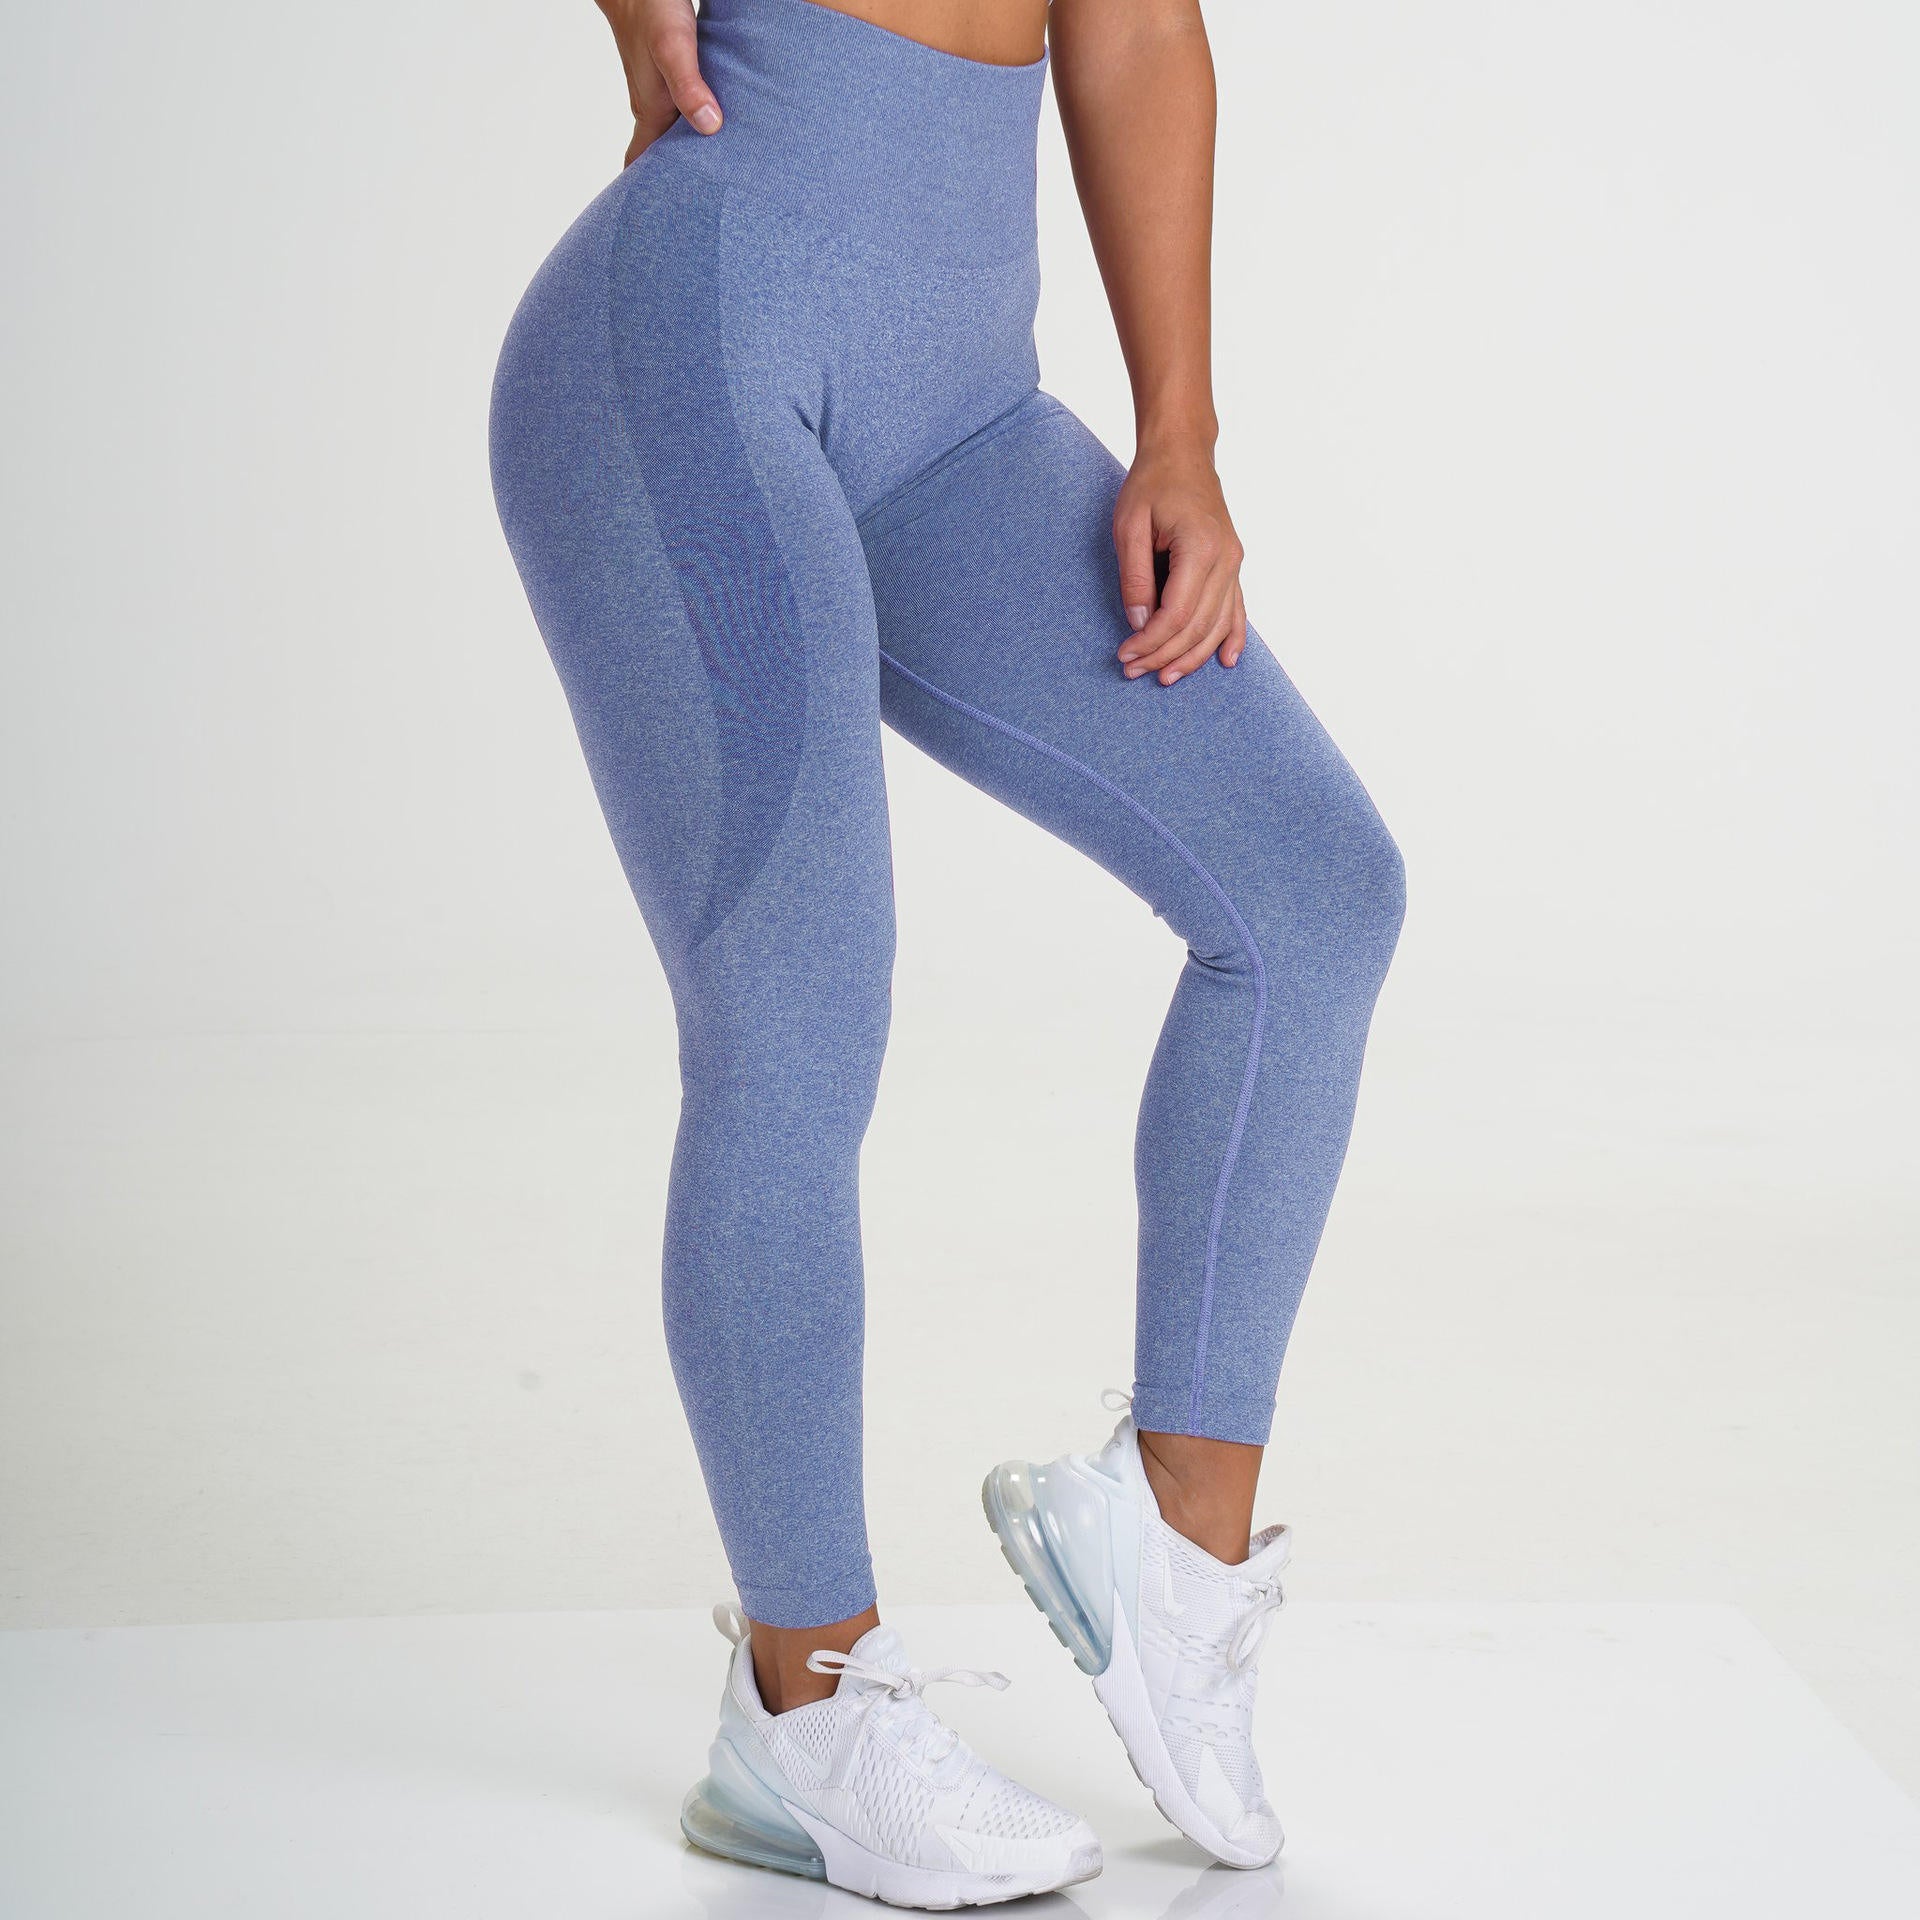 eczipvz Workout Leggings for Women Lined Leggings Women - High Waisted  Thick Warm Soft Pants Tummy Control Thermal Casual Blue,S